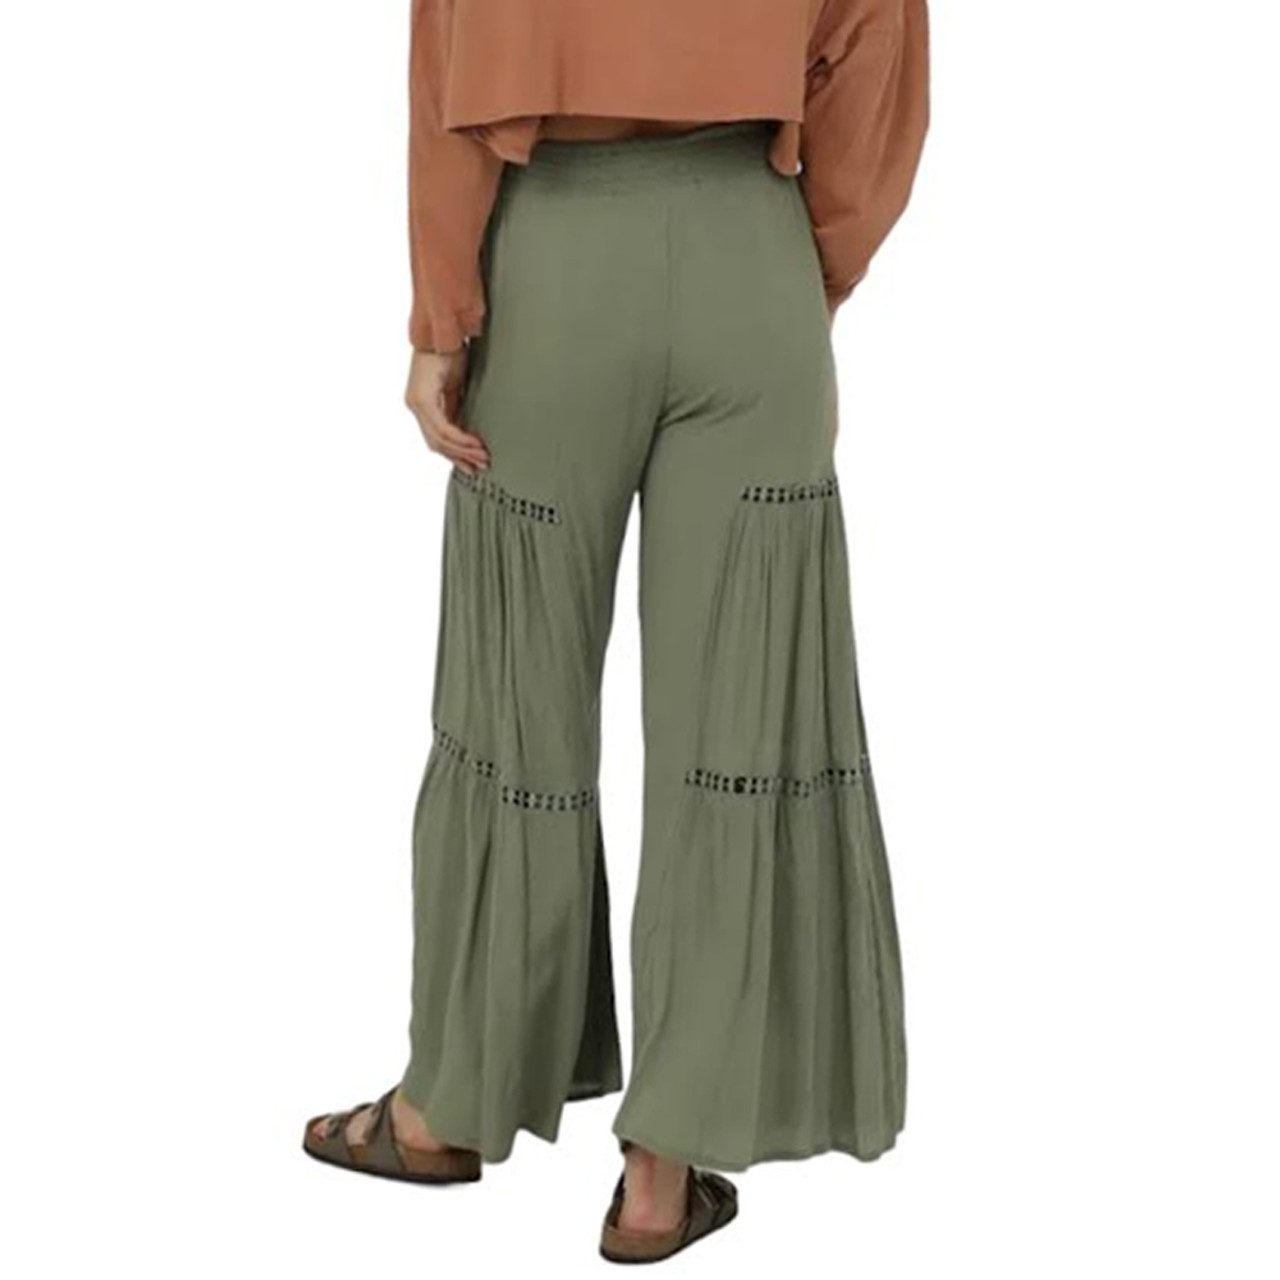 https://cdn11.bigcommerce.com/s-kfeqy/images/stencil/1280x1280/products/9162/41117/ANG110-C-Olive-Green-Pants__32102.1698854265.jpg?c=2?imbypass=on